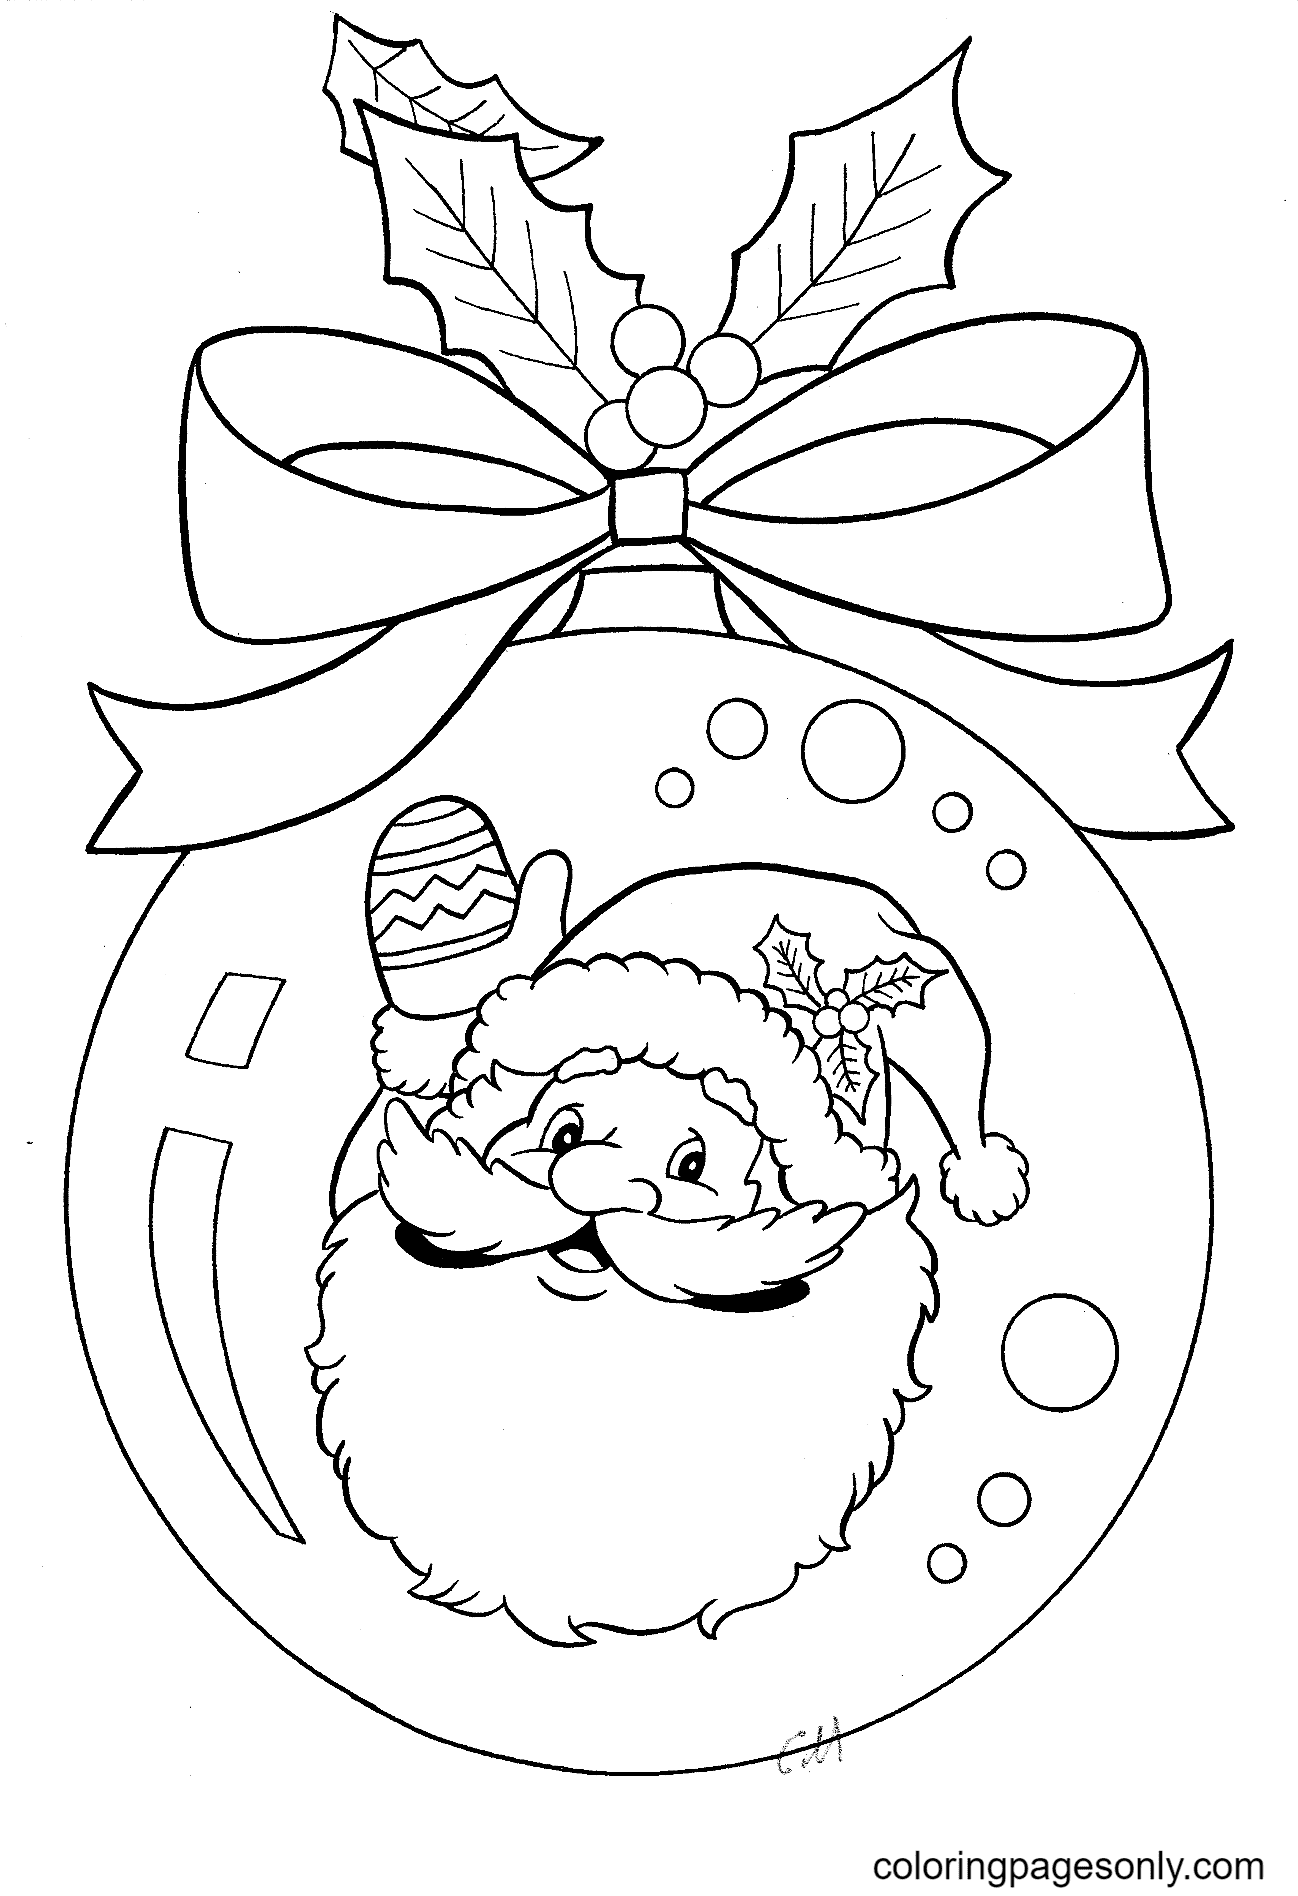 Christmas Decorations Ball Coloring Pages